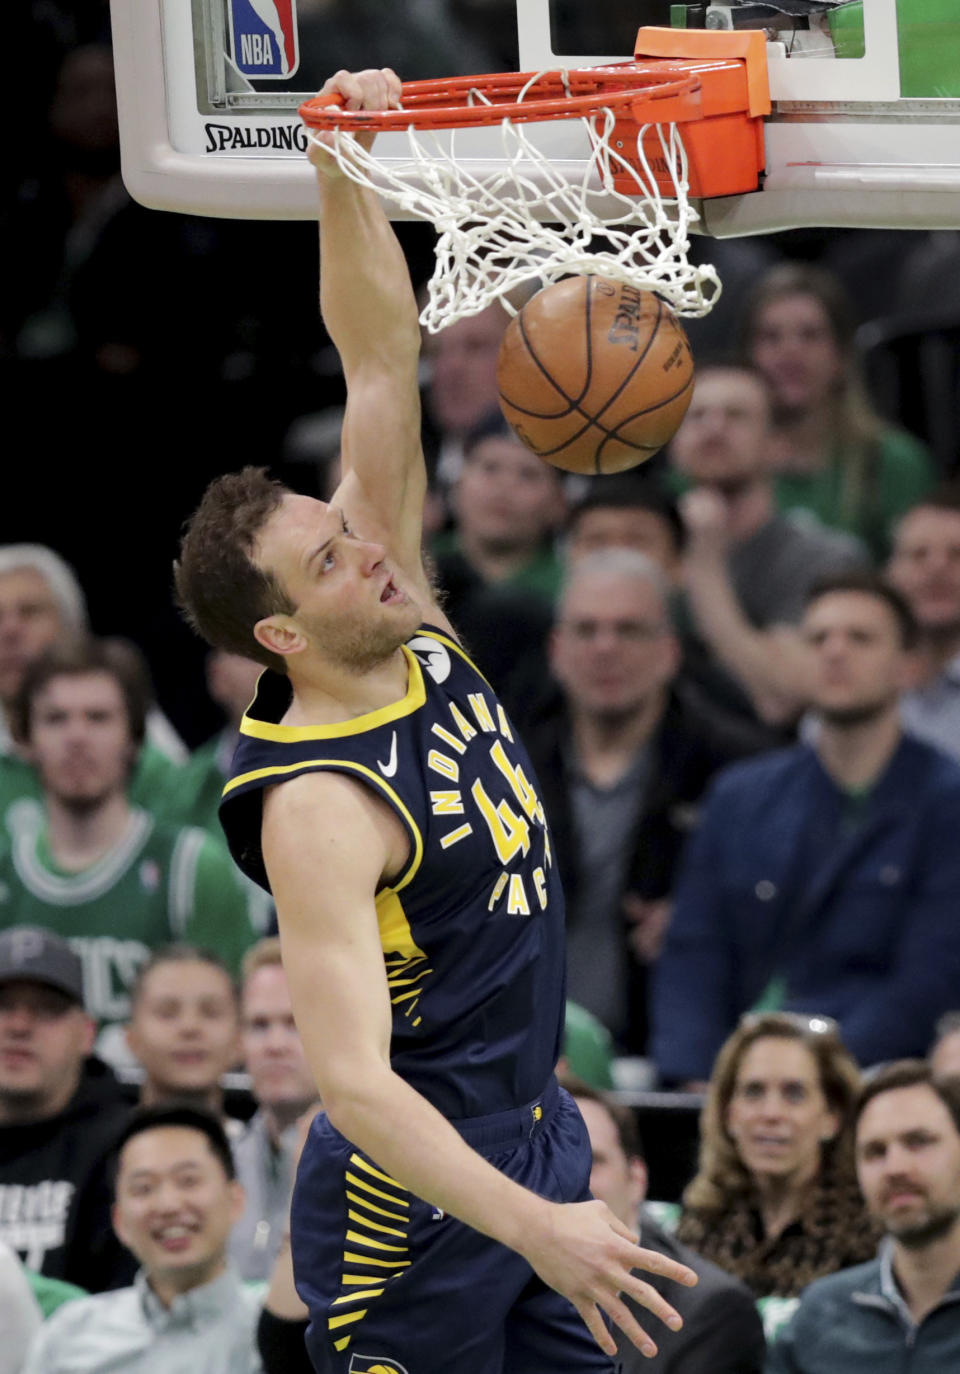 Indiana Pacers forward Bojan Bogdanovic (44) slams a dunk against the Boston Celtics during the first quarter of Game 2 of an NBA basketball first-round playoff series, Wednesday, April 17, 2019, in Boston. (AP Photo/Charles Krupa)